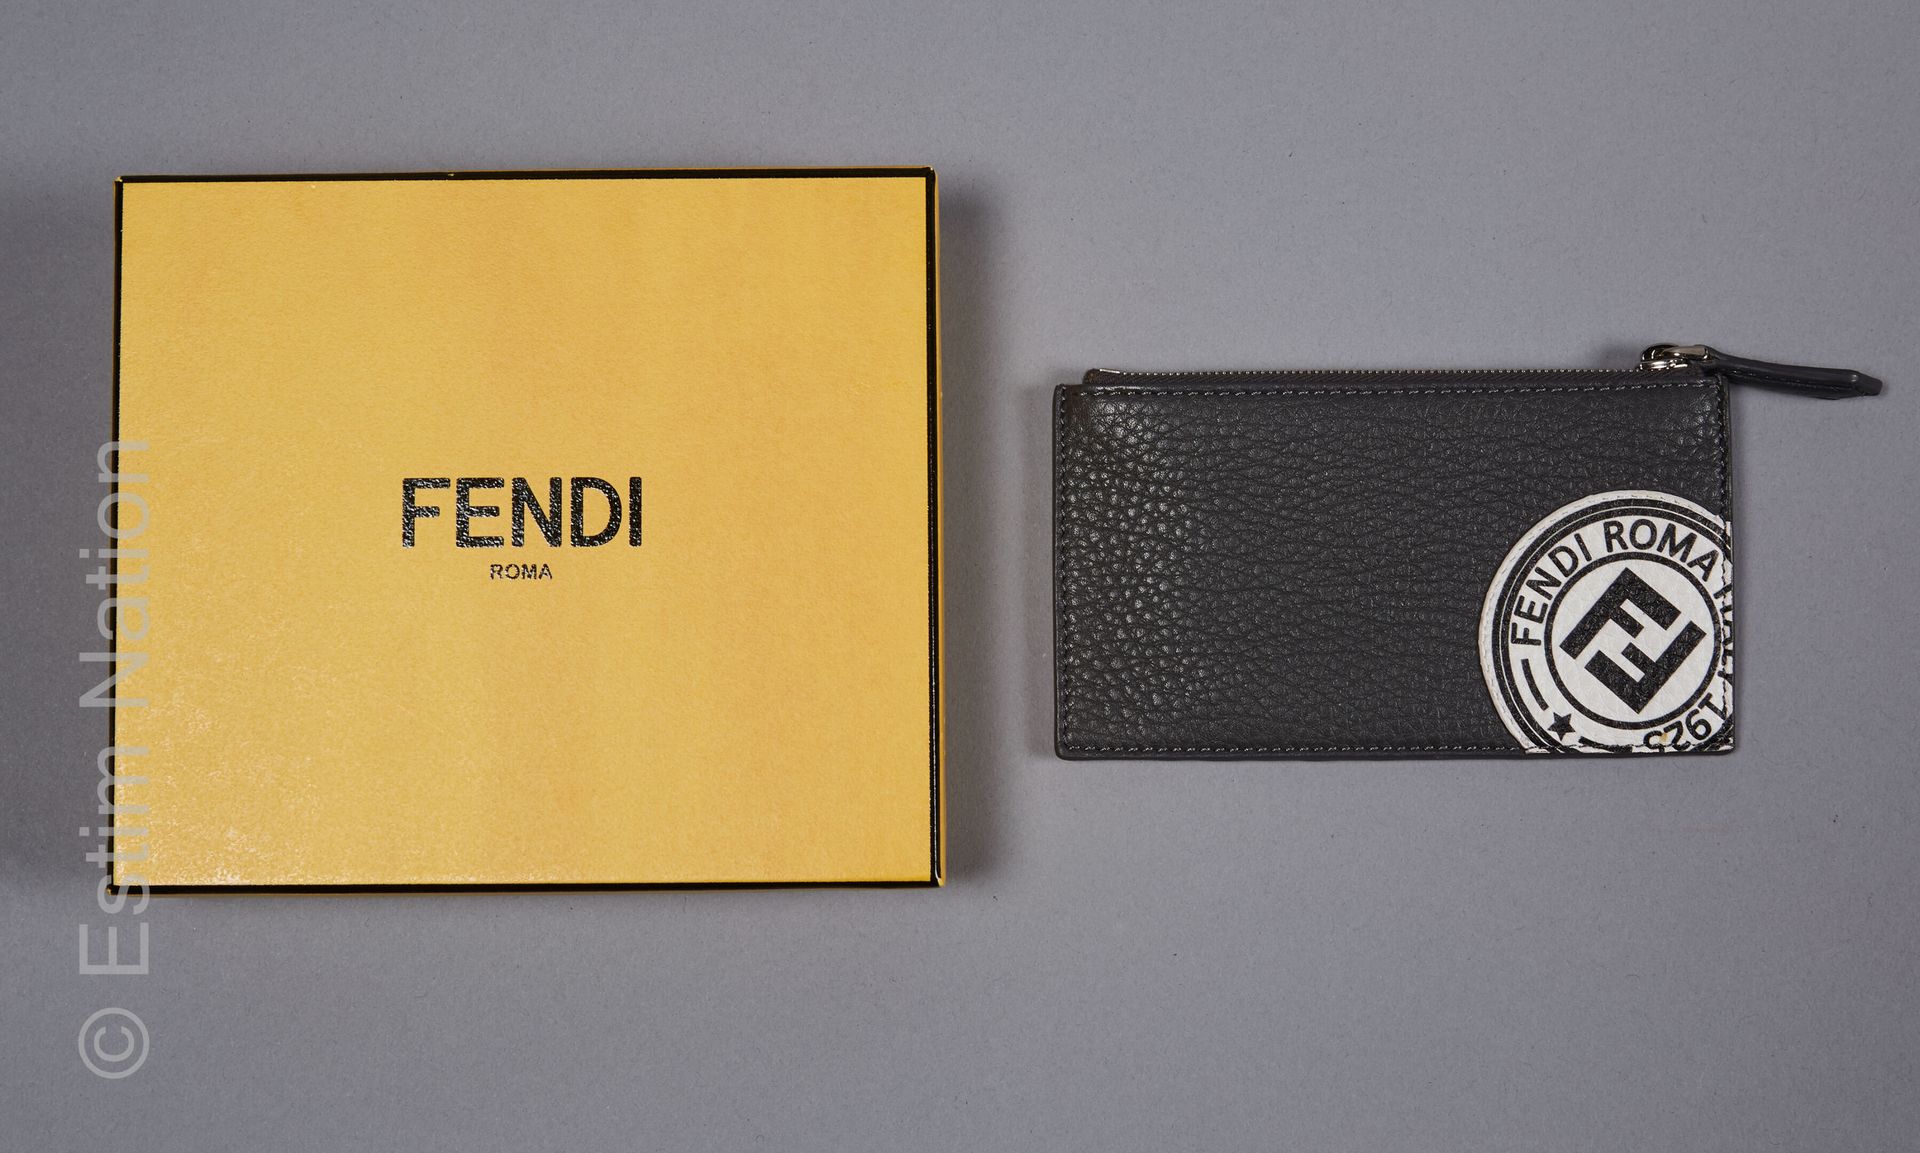 FENDI Zipped CARD HOLDER in anthracite grained leather, canvas interior (dust ba&hellip;